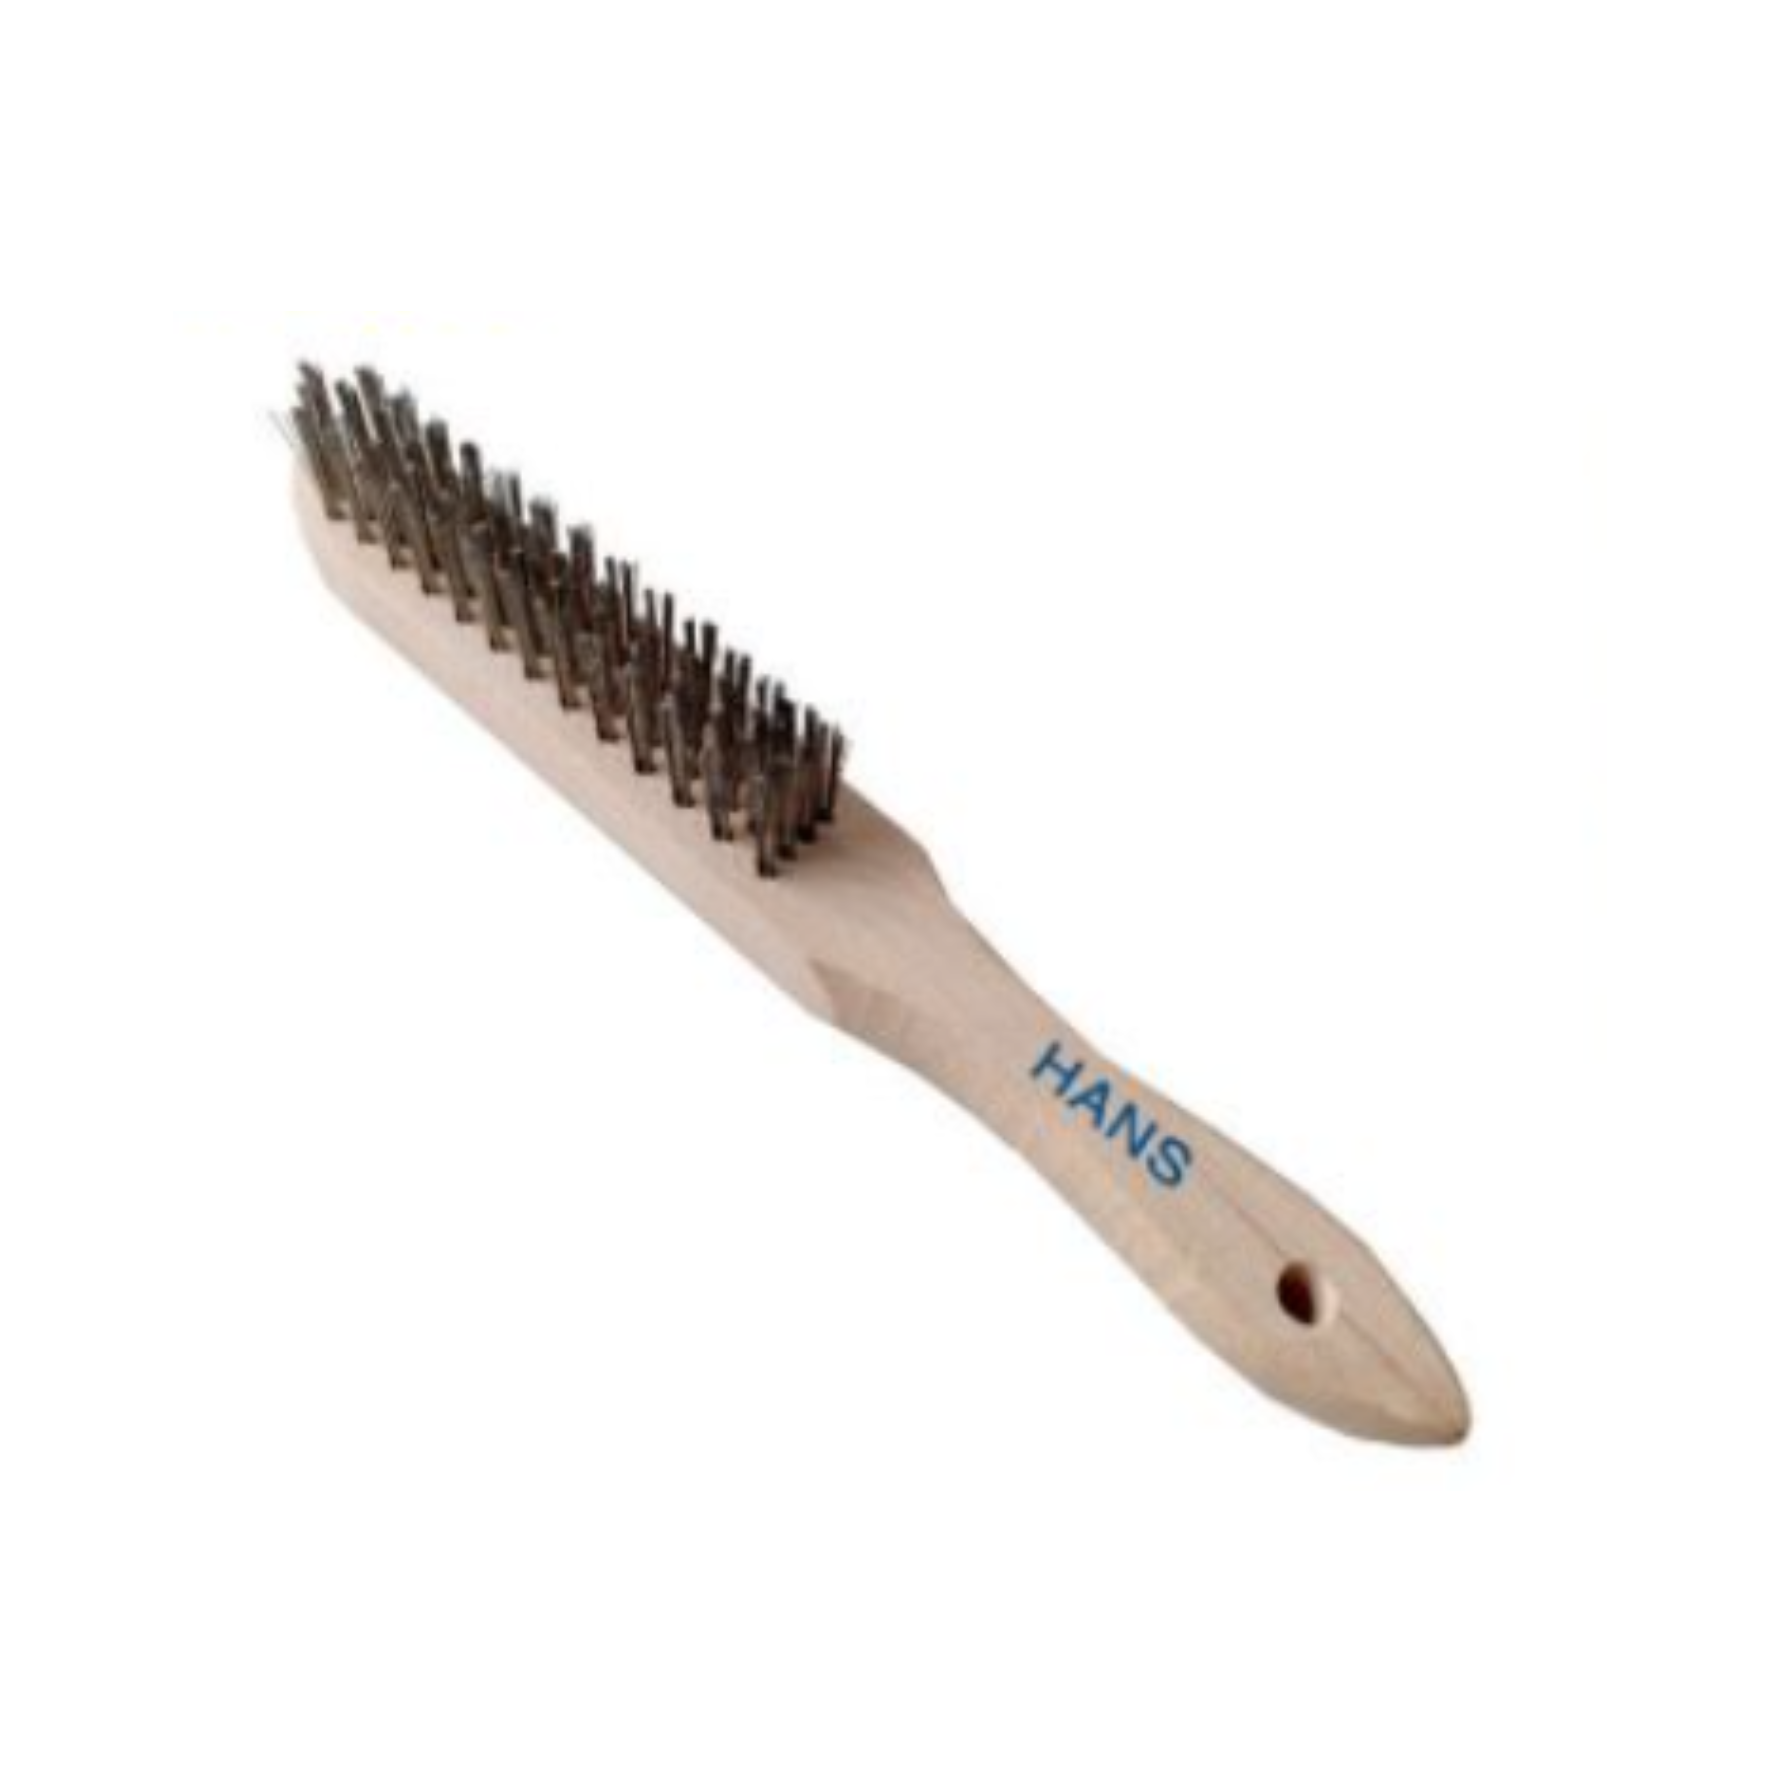 Hans STAINLESS STEEL WIRE Brush 4 ROW